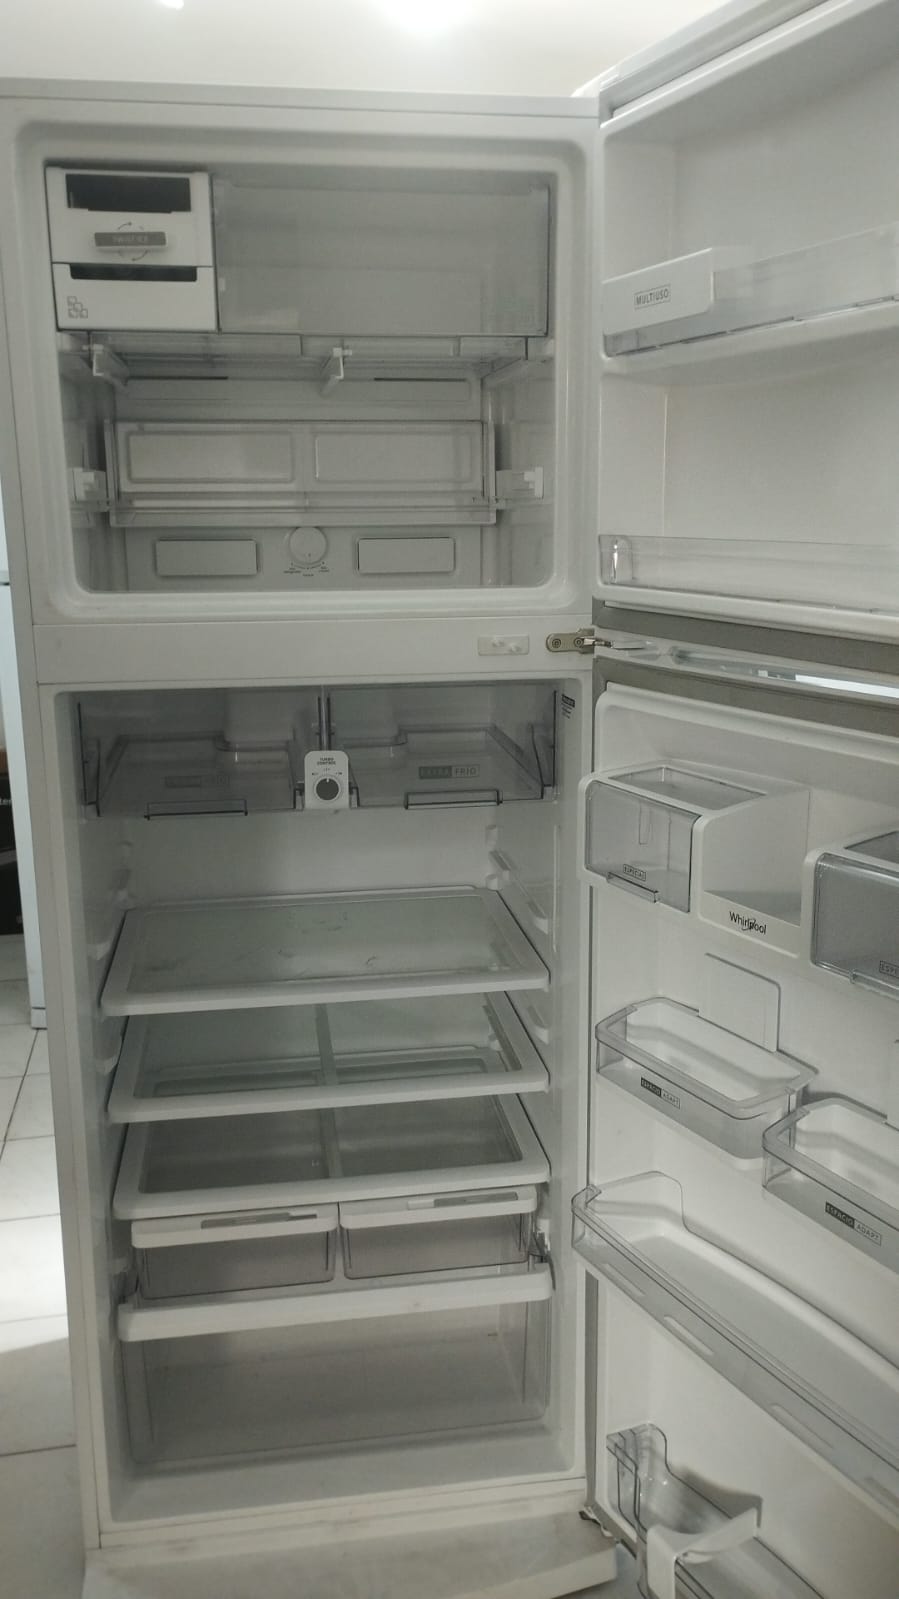 OUTLET, Refrigerador Whirlpool No Frost